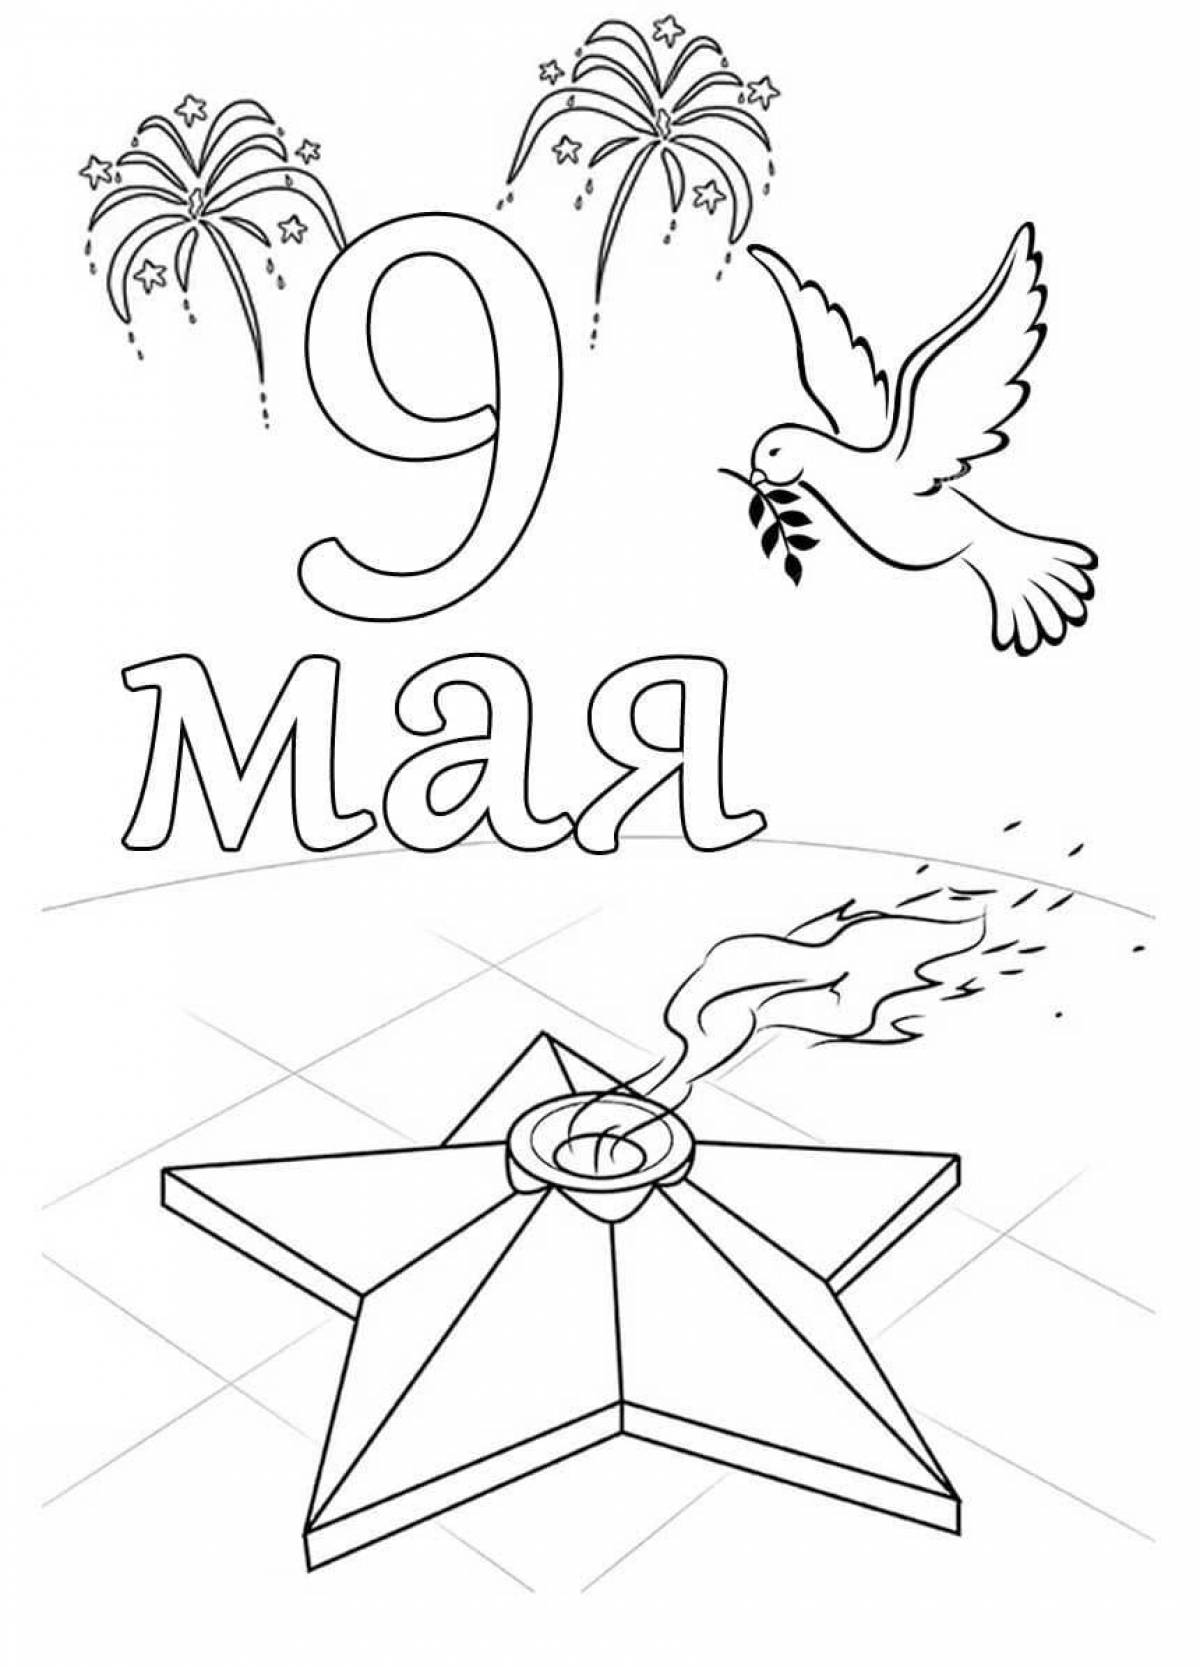 Adorably illustrated eternal flame coloring page for kids